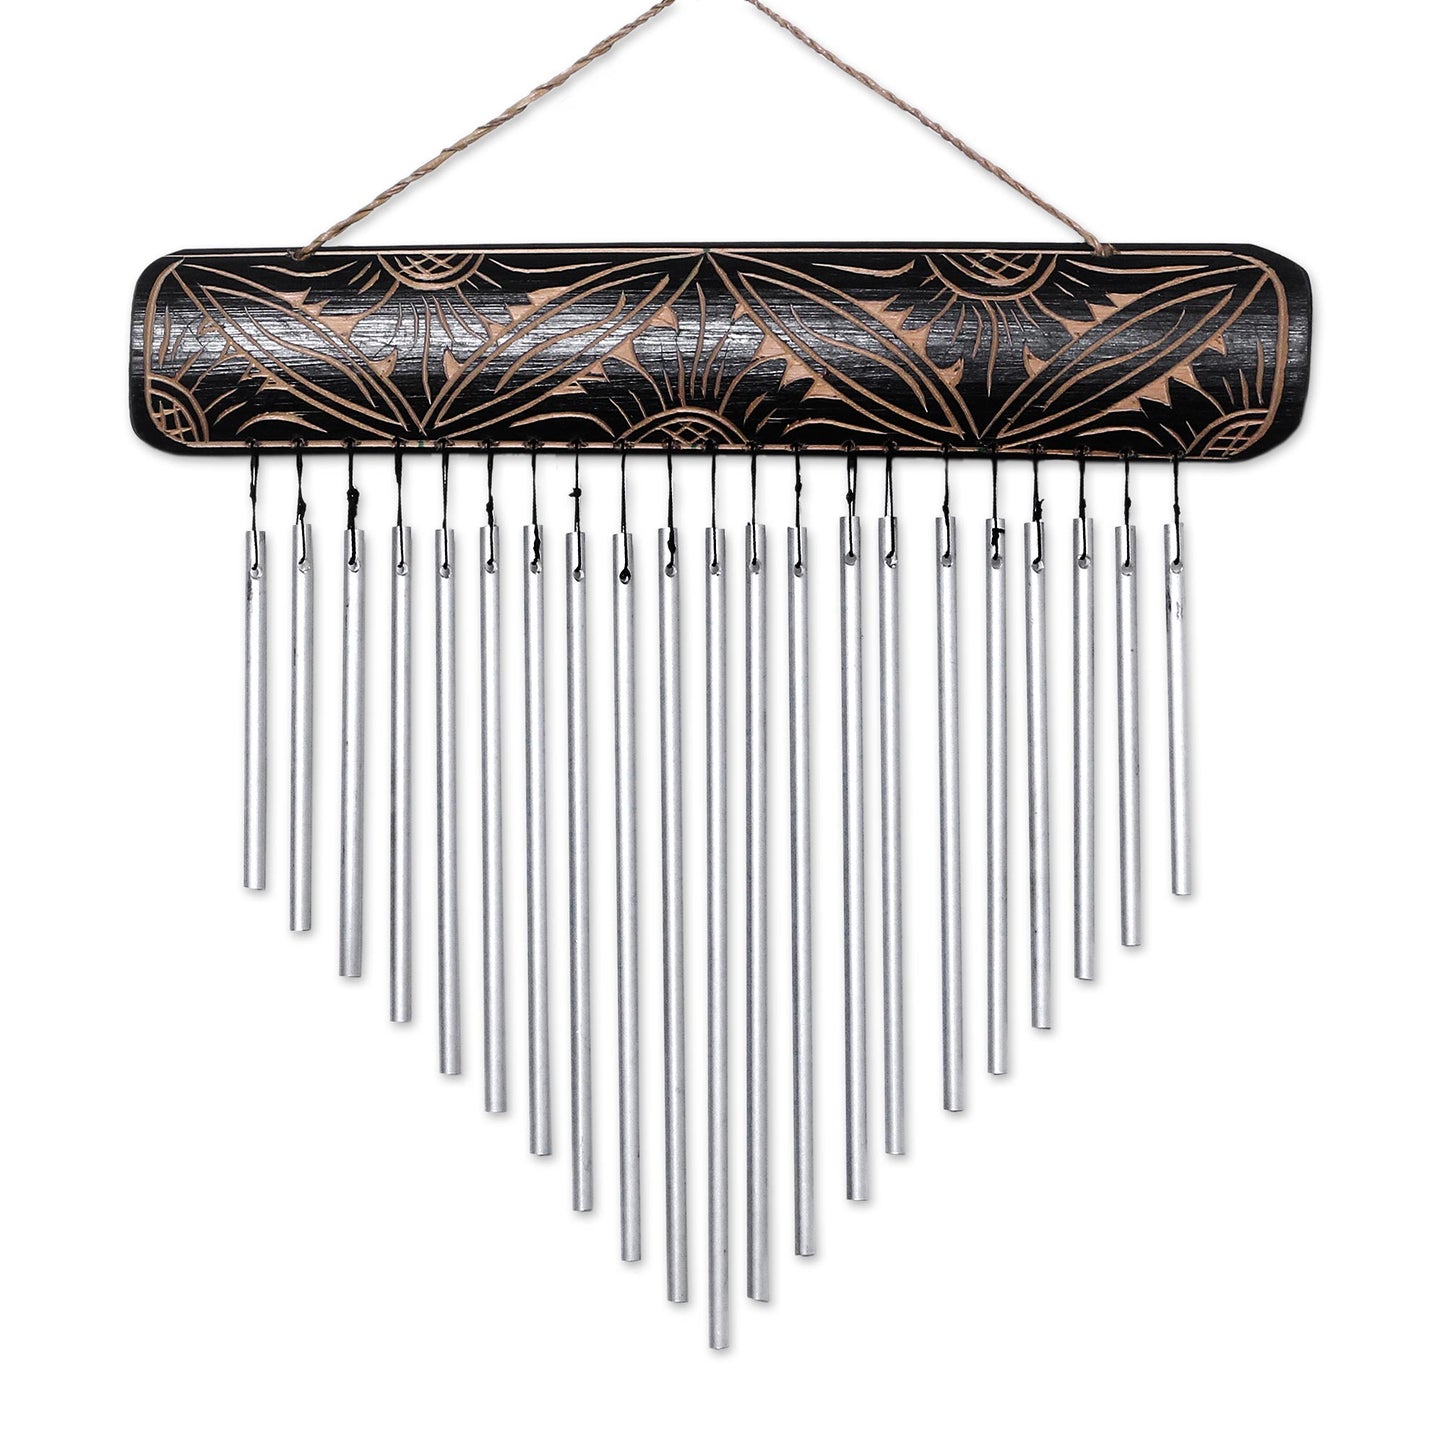 Melodic Dance Handcrafted Bamboo and Aluminum Wind Chimes from Bali